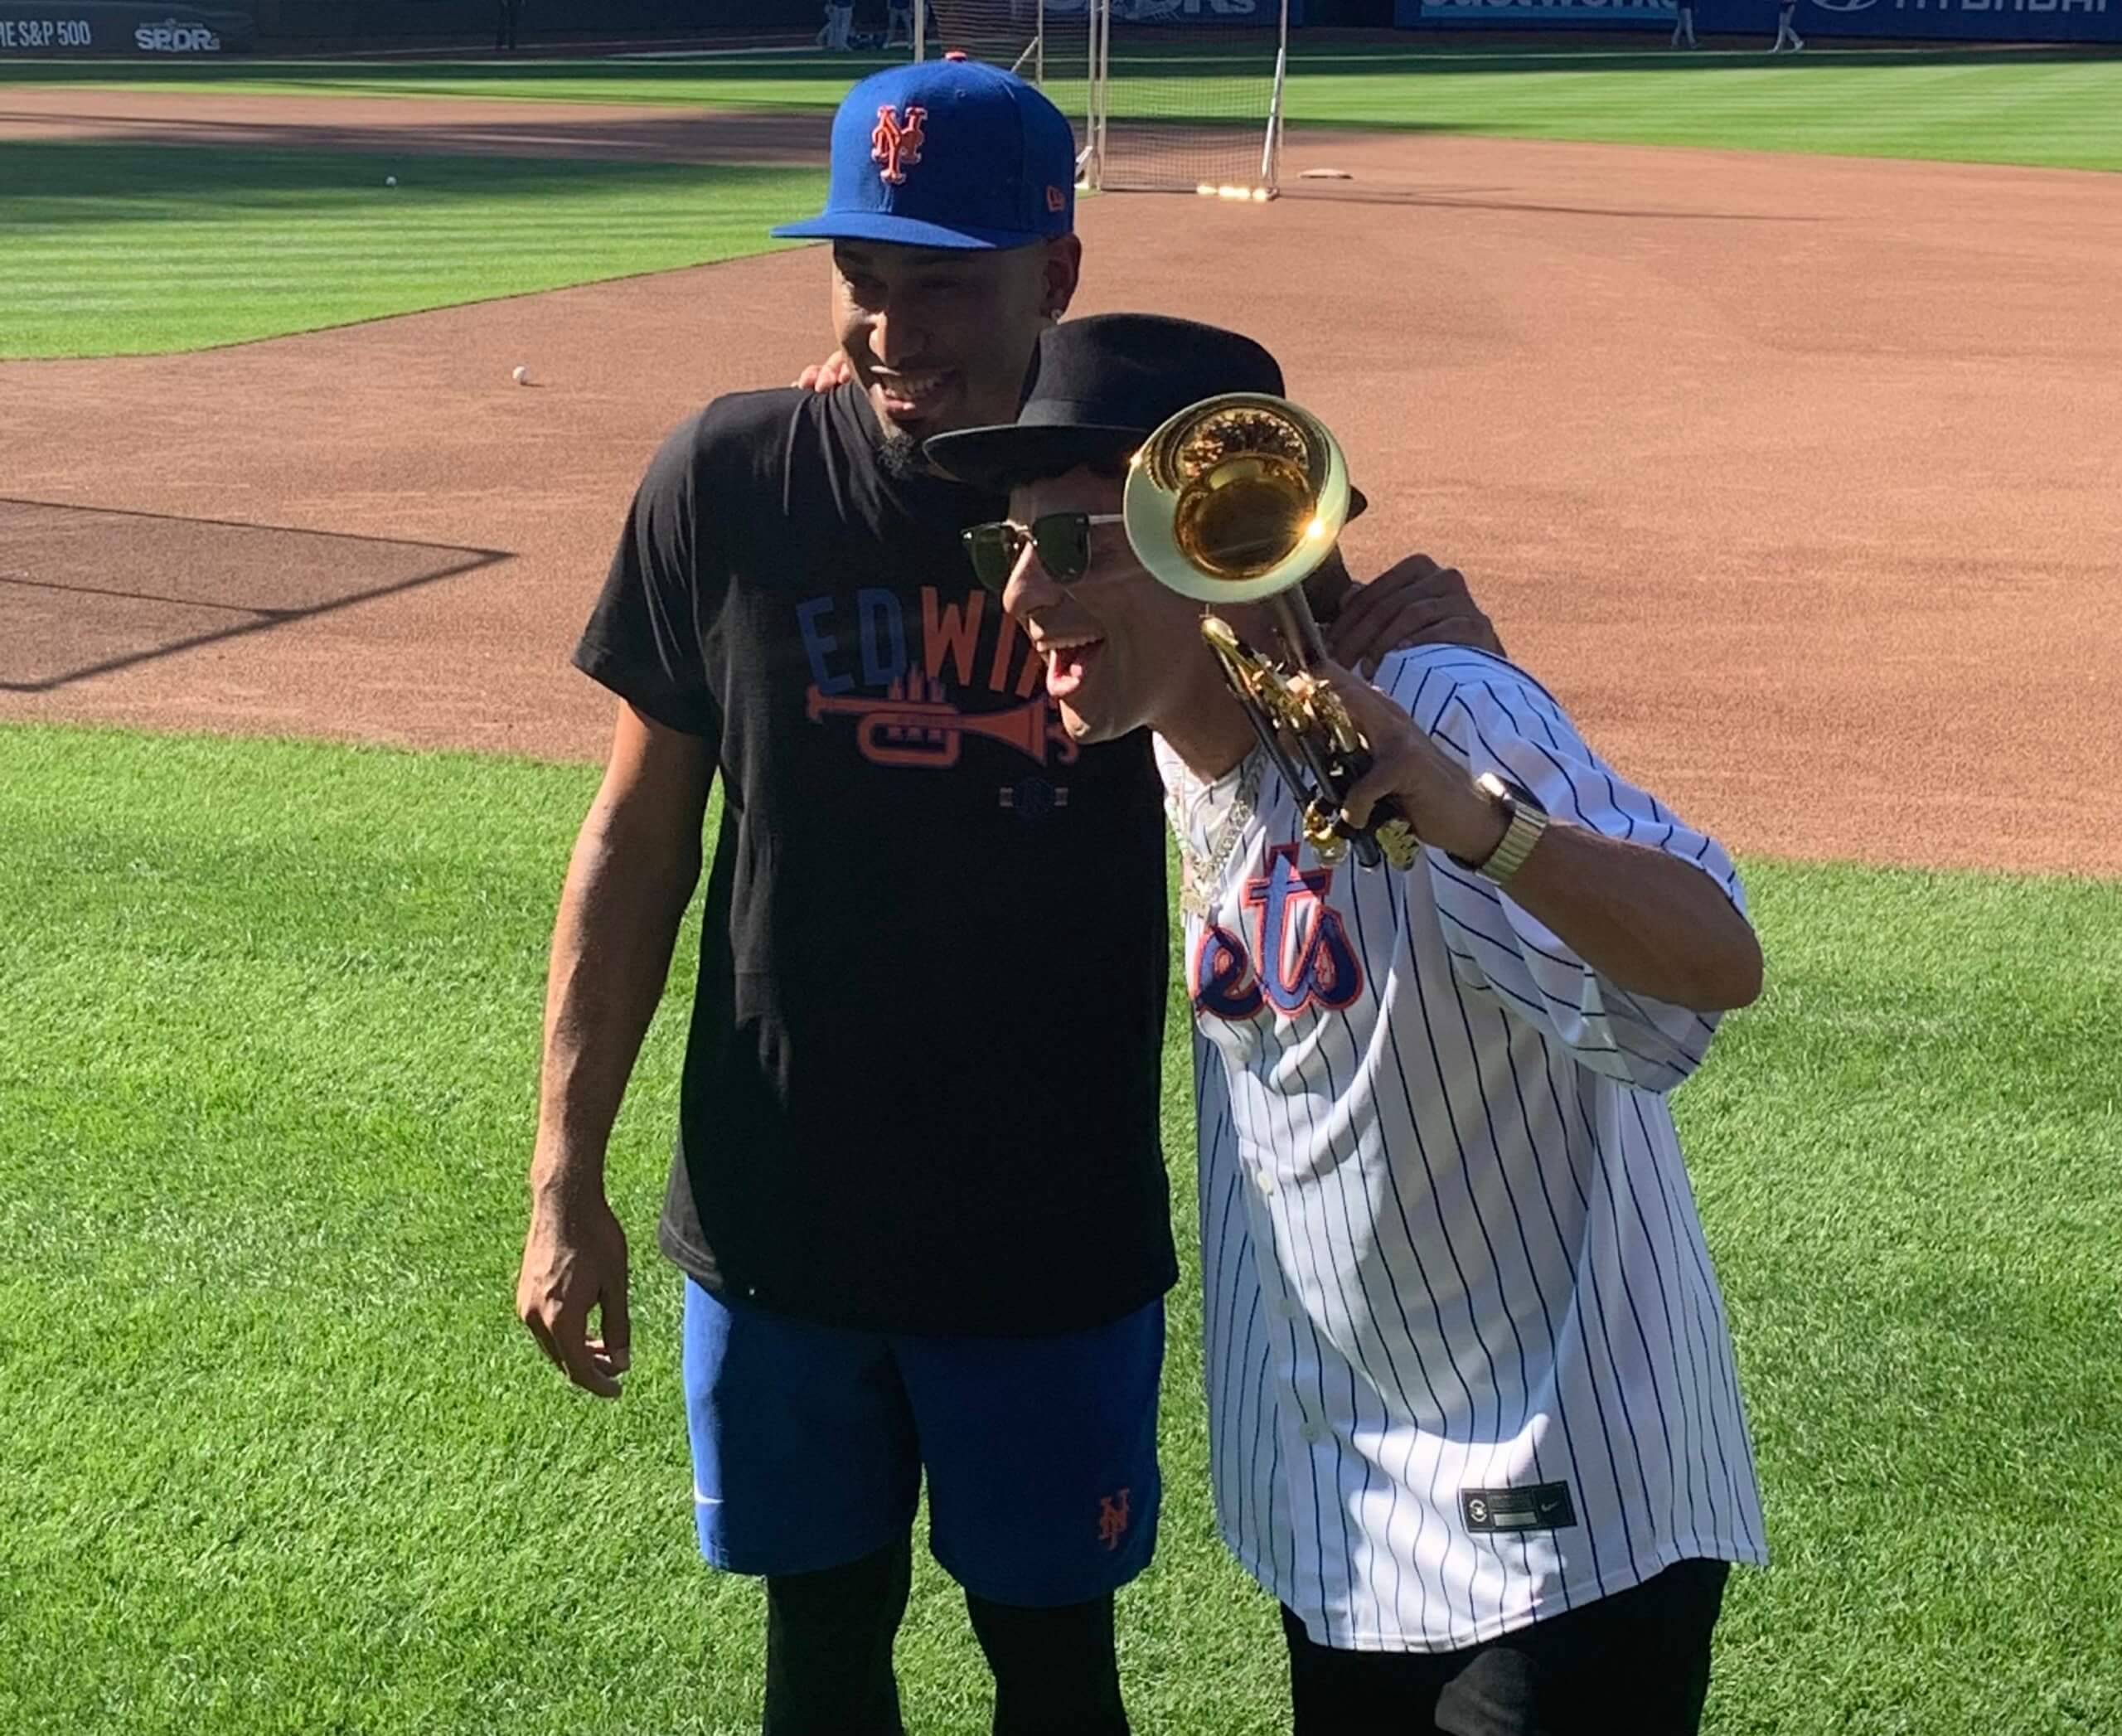 Timmy Trumpet muted in New York Mets' loss, says he'll return Wednesday  with hopes Edwin Diaz enters game to his 'Narco' song - ESPN